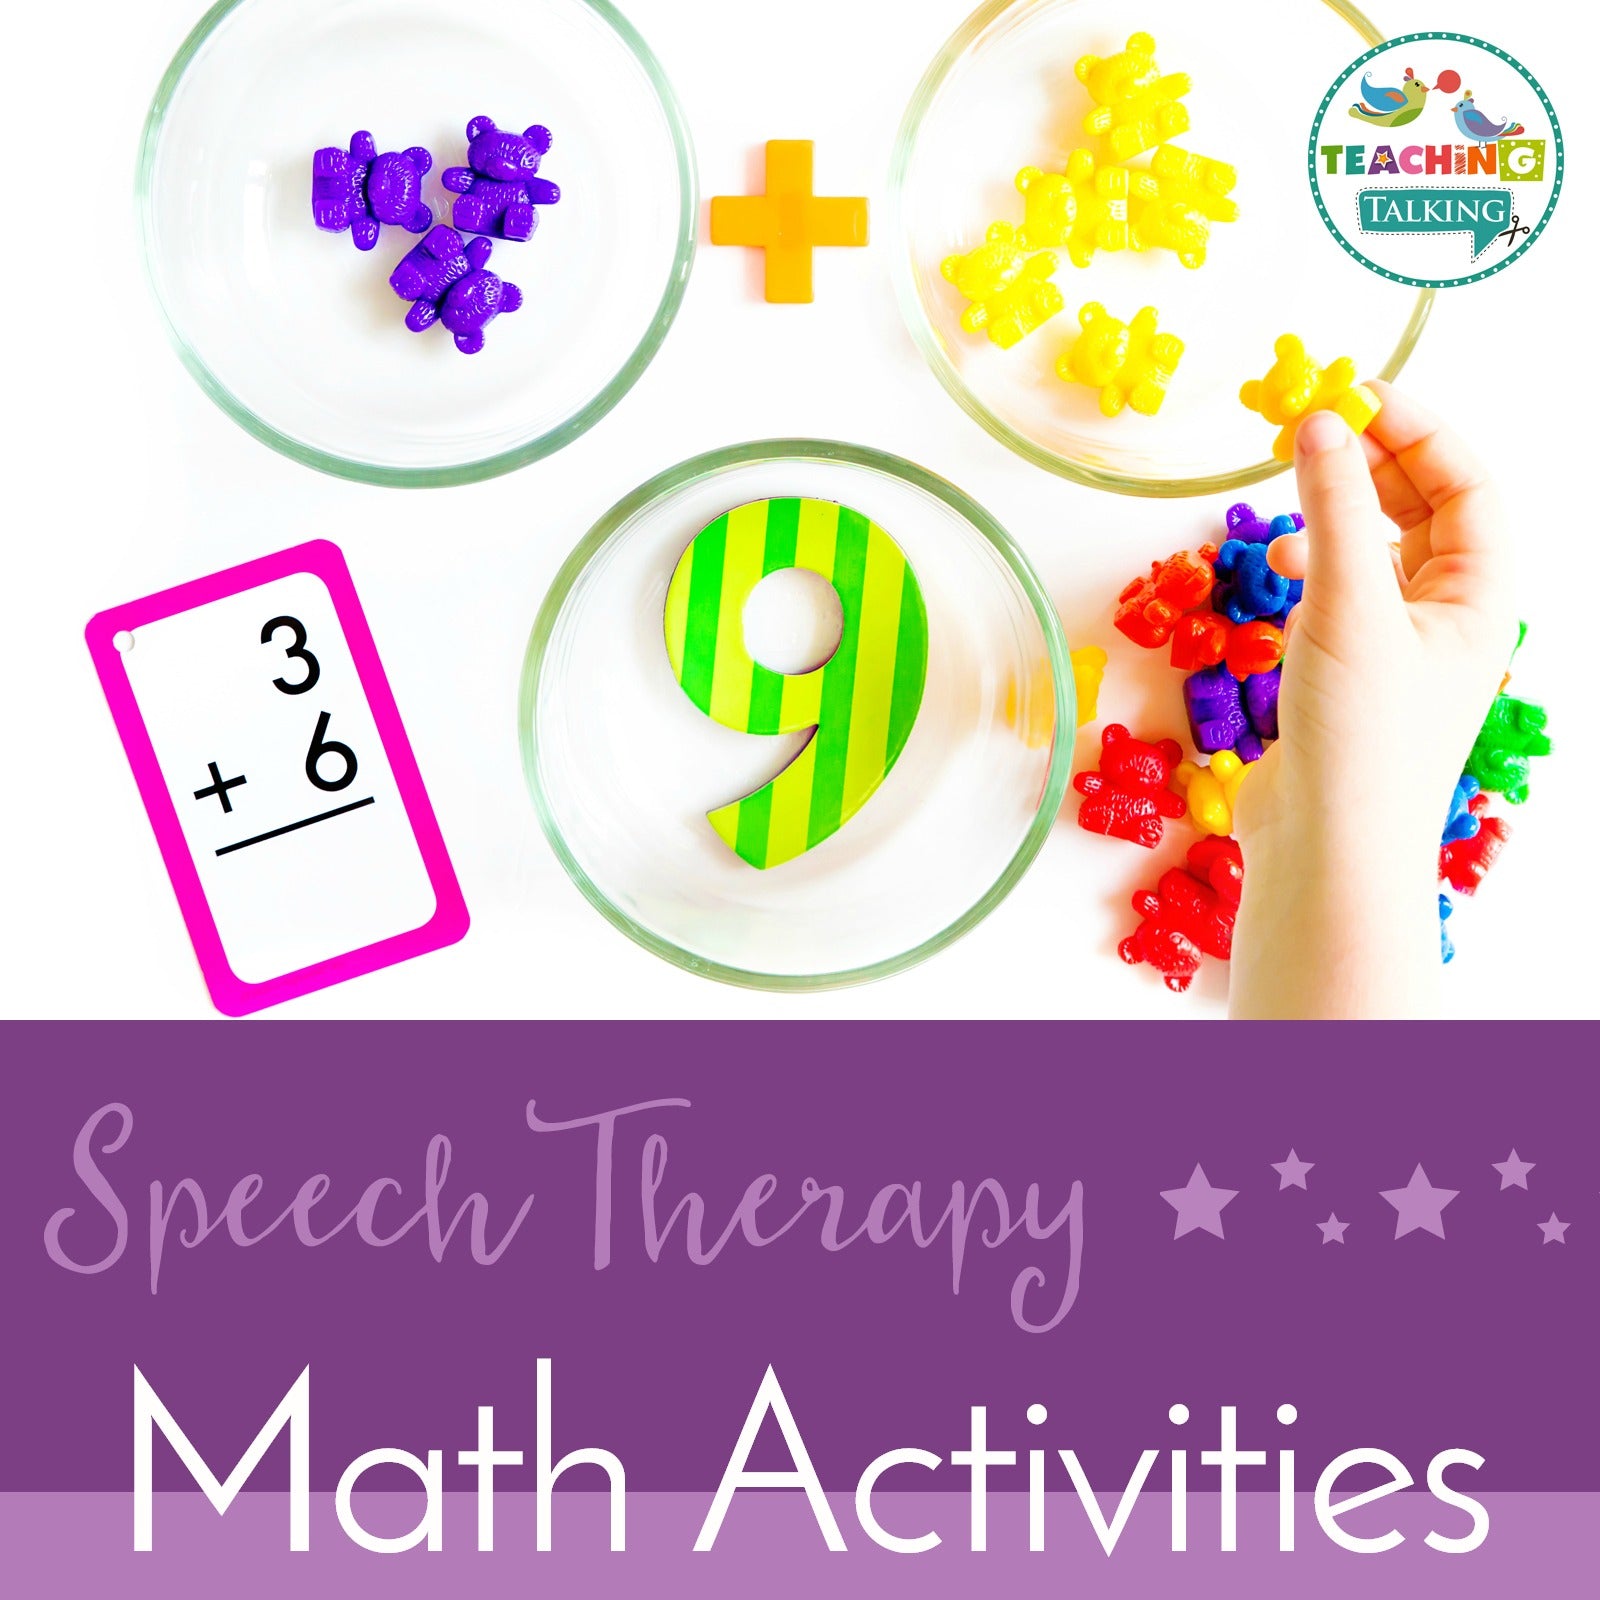 Speech Therapy Math Activities - How can I help my child?